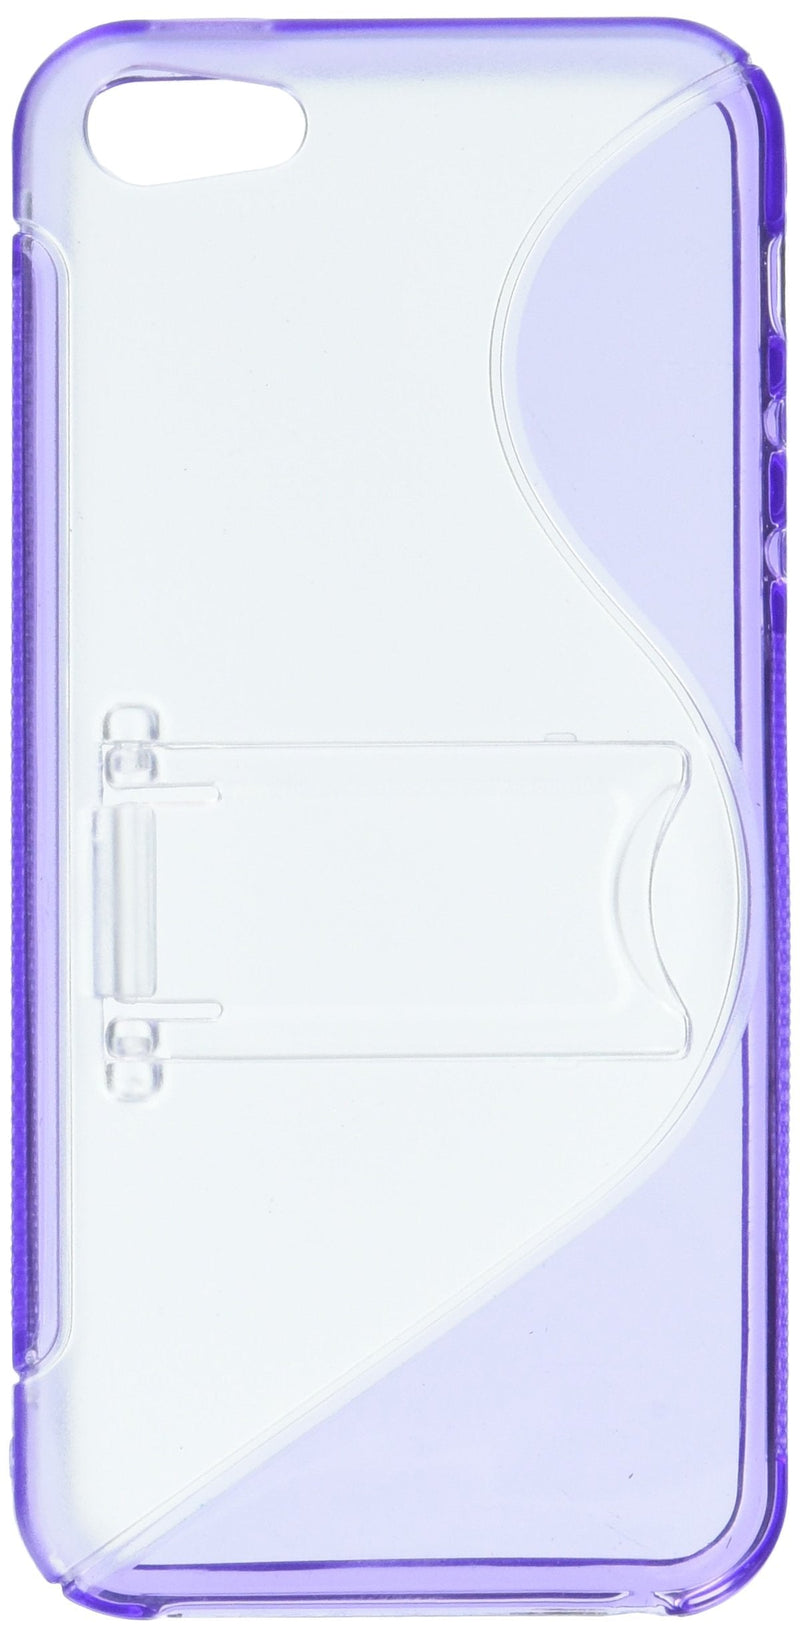 MYBAT IPHONE5CASKGM2034NP Sensual Gummy Transparent Kickstand Protective Case for iPhone 5 / iPhone 5S - 1 Pack - Retail Packaging - Clear/Purple Standard Packaging